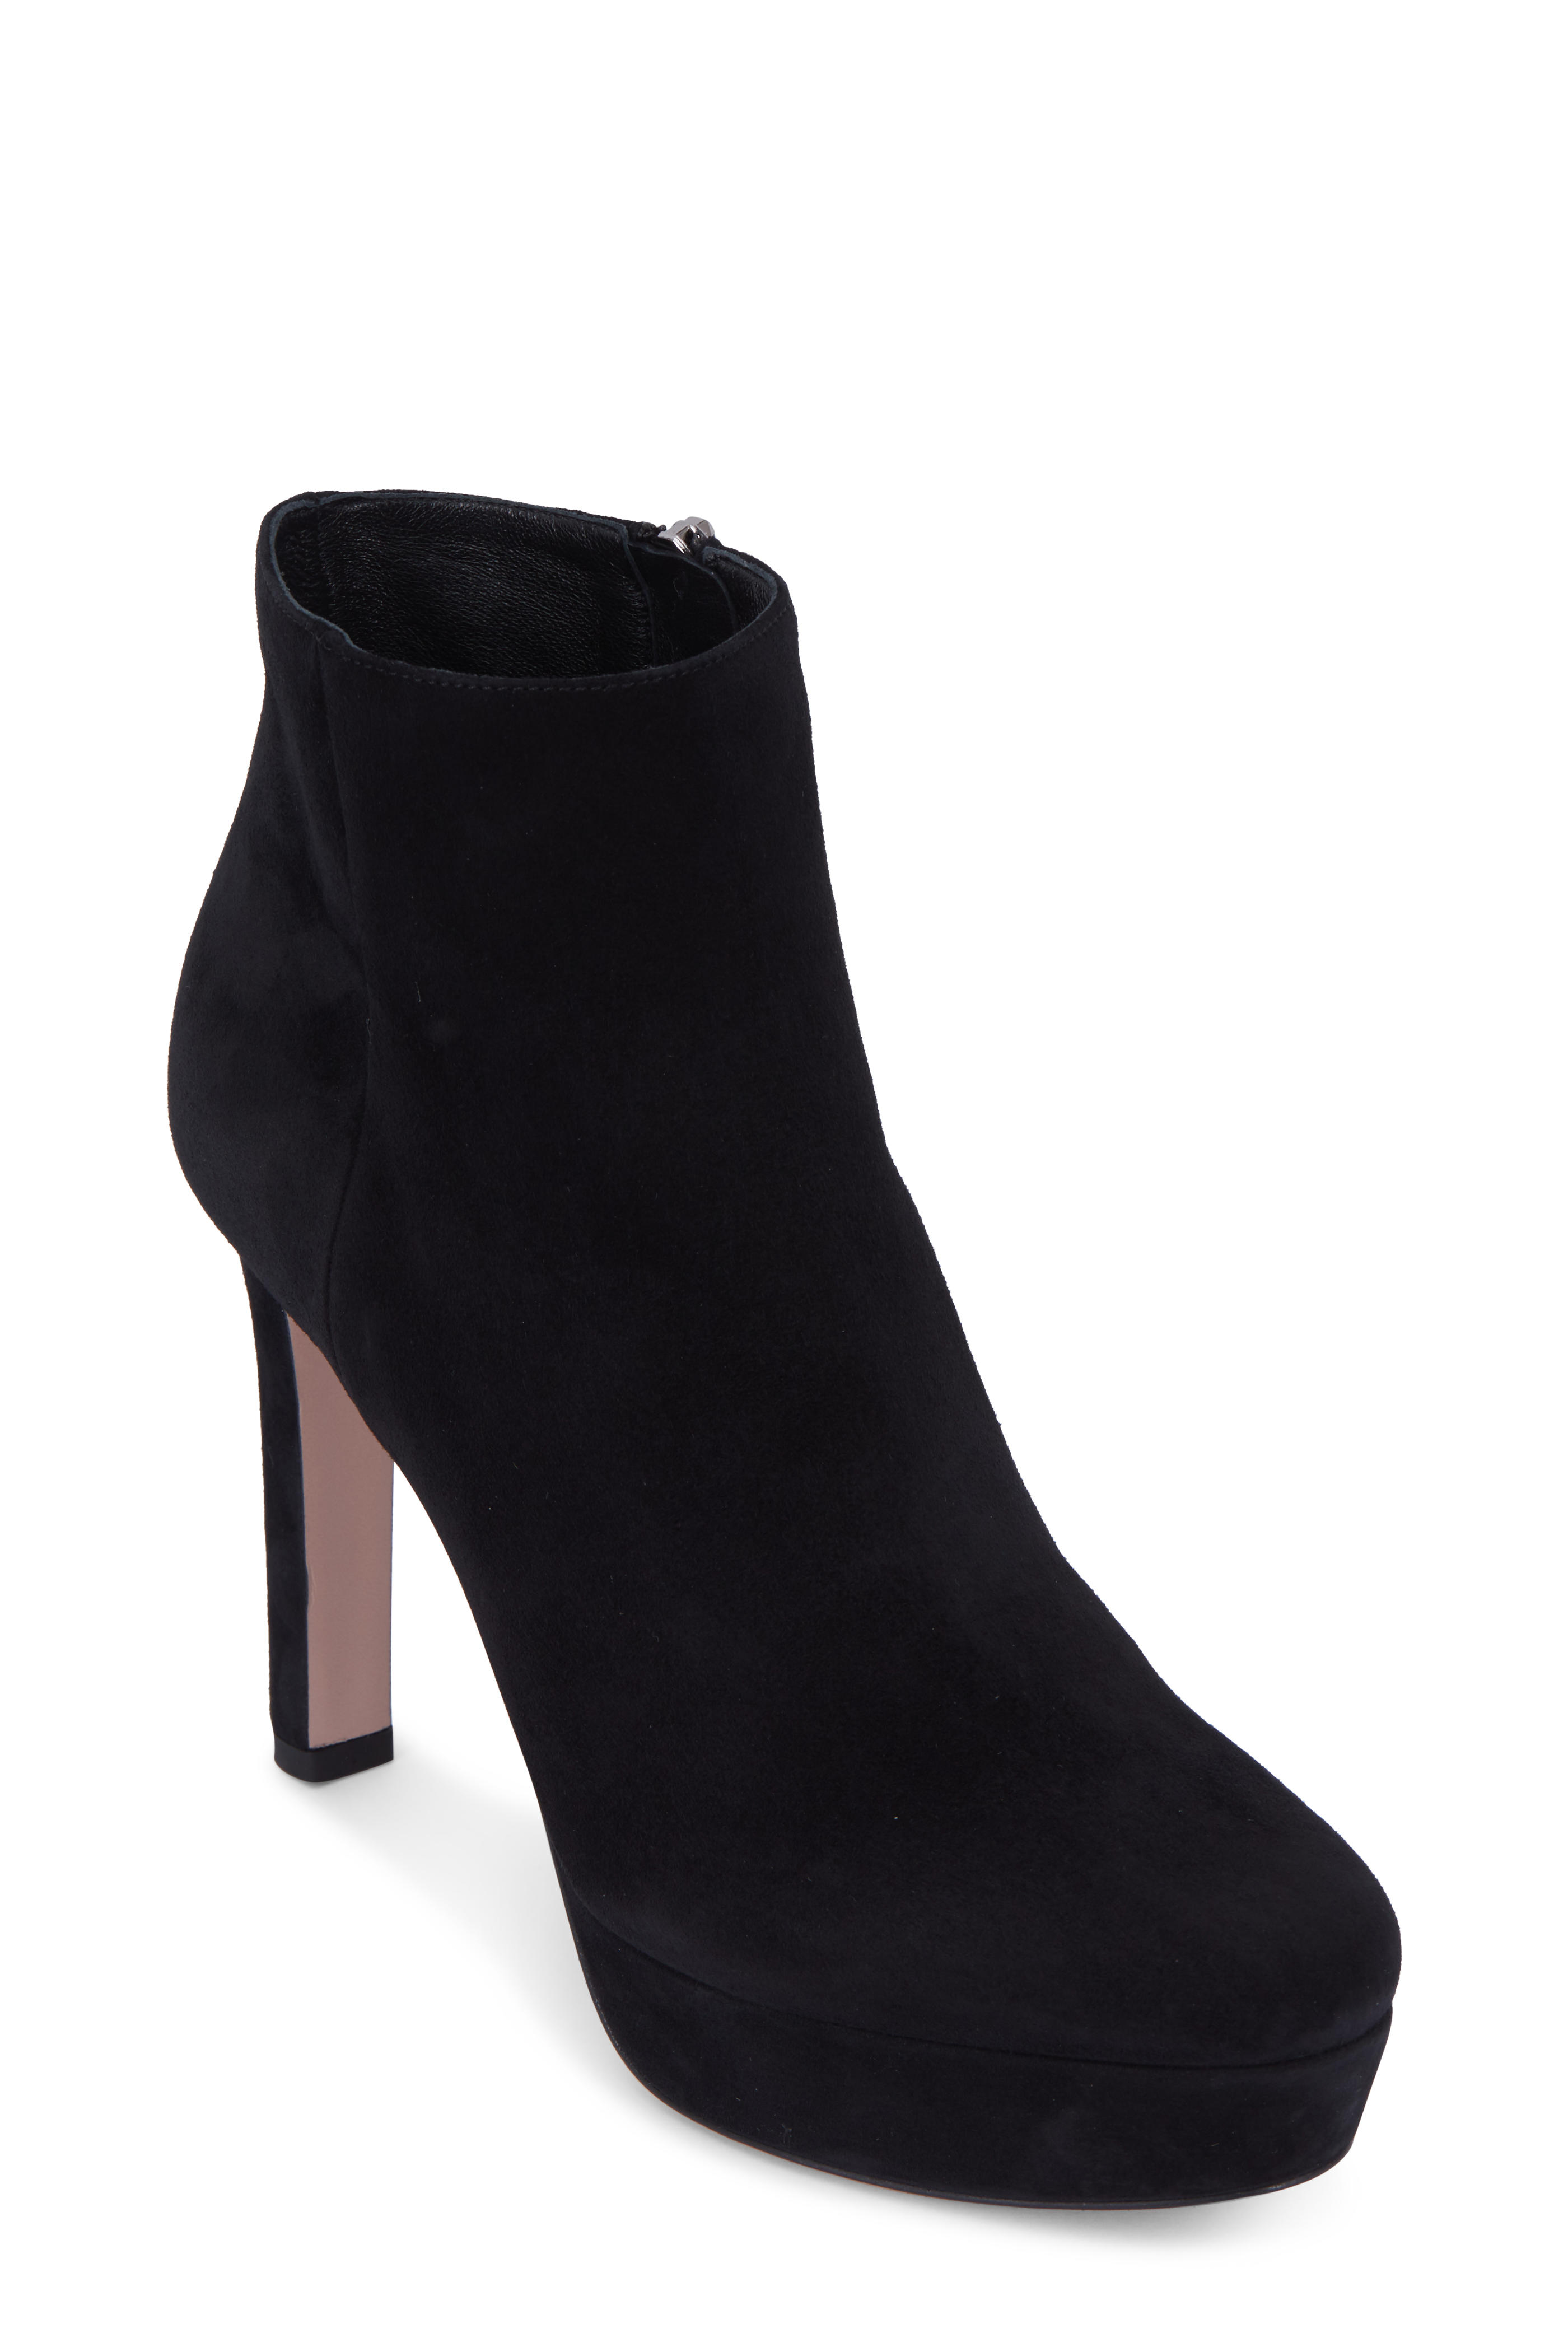 prada black suede ankle boots